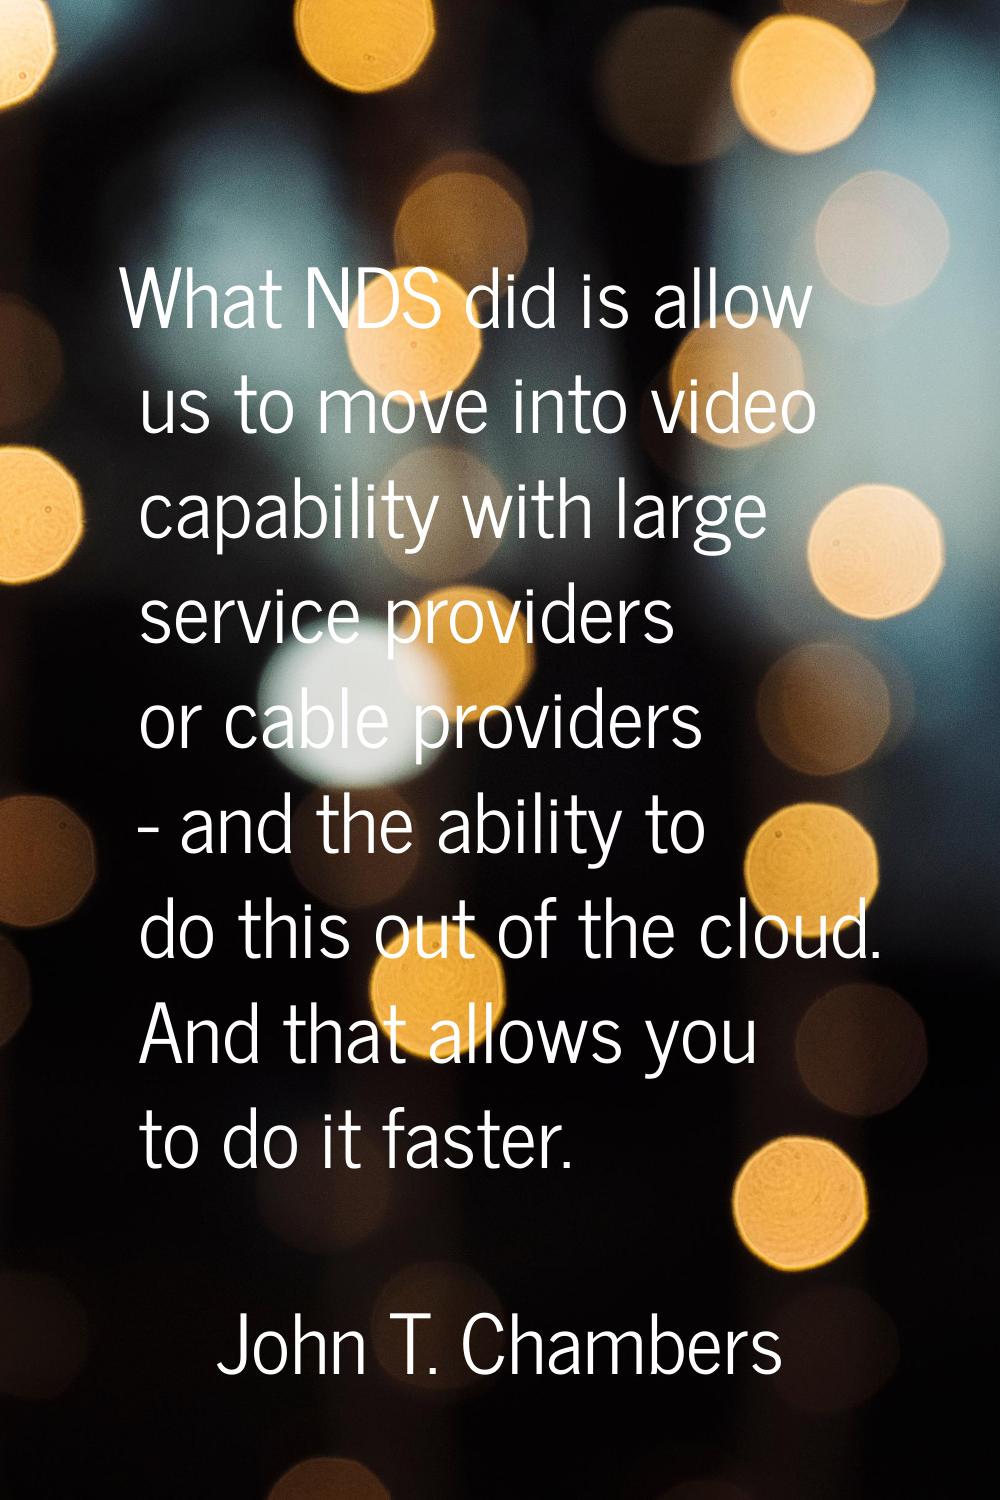 What NDS did is allow us to move into video capability with large service providers or cable provid